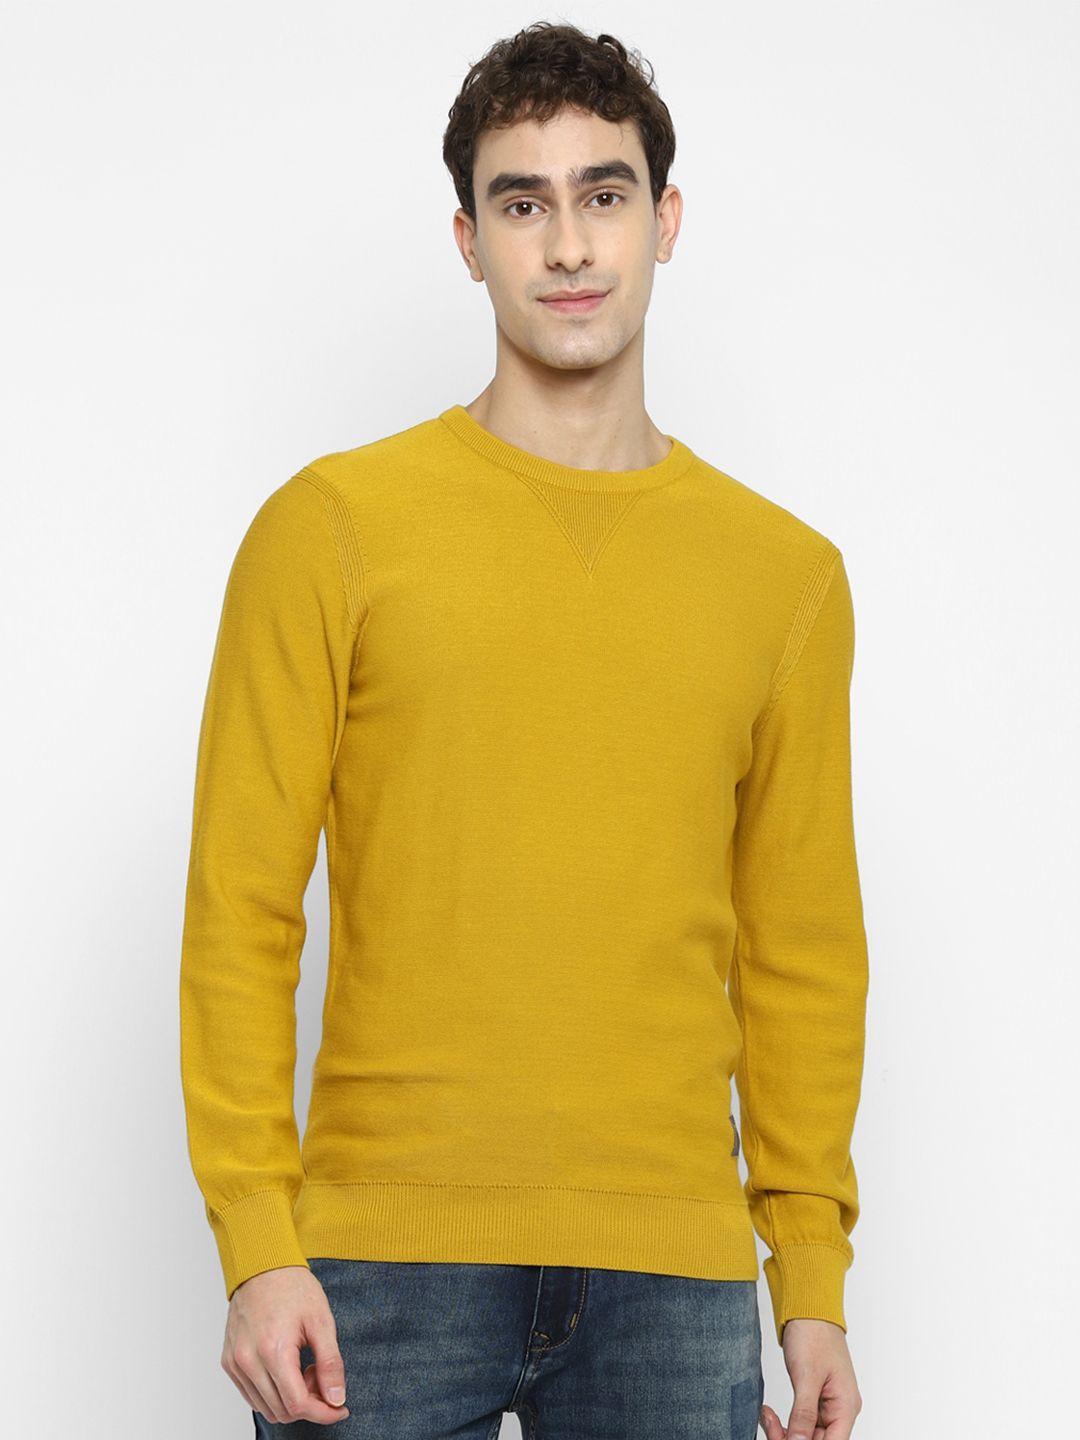 red-chief-men-yellow-pullover